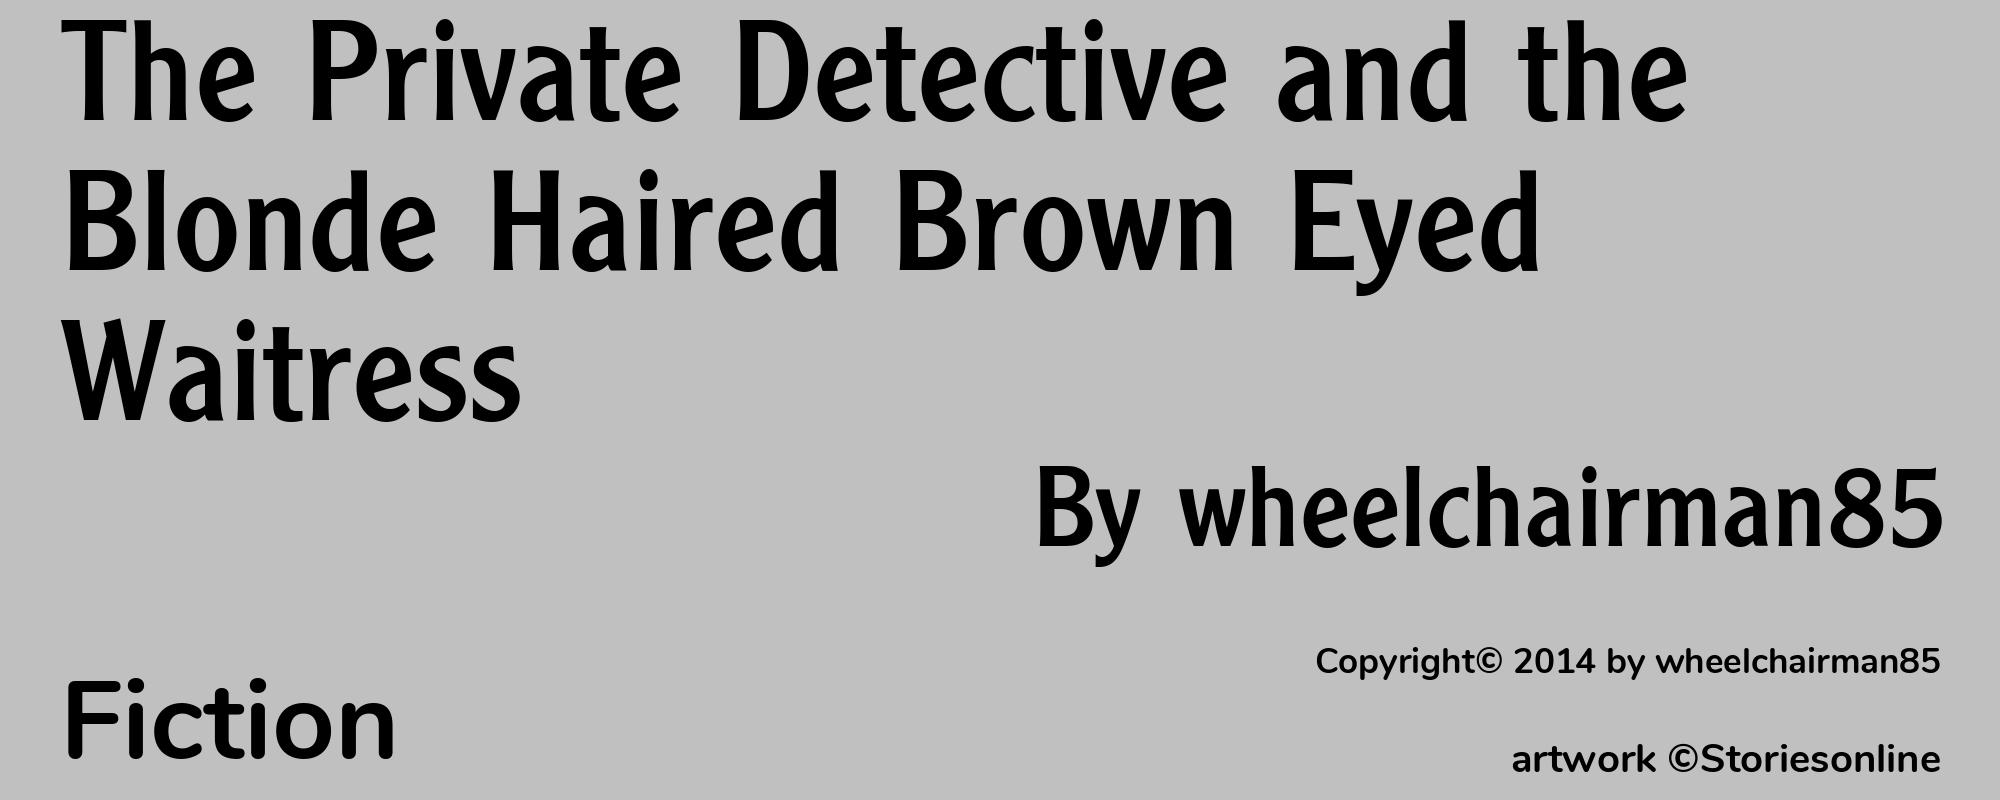 The Private Detective and the Blonde Haired Brown Eyed Waitress - Cover